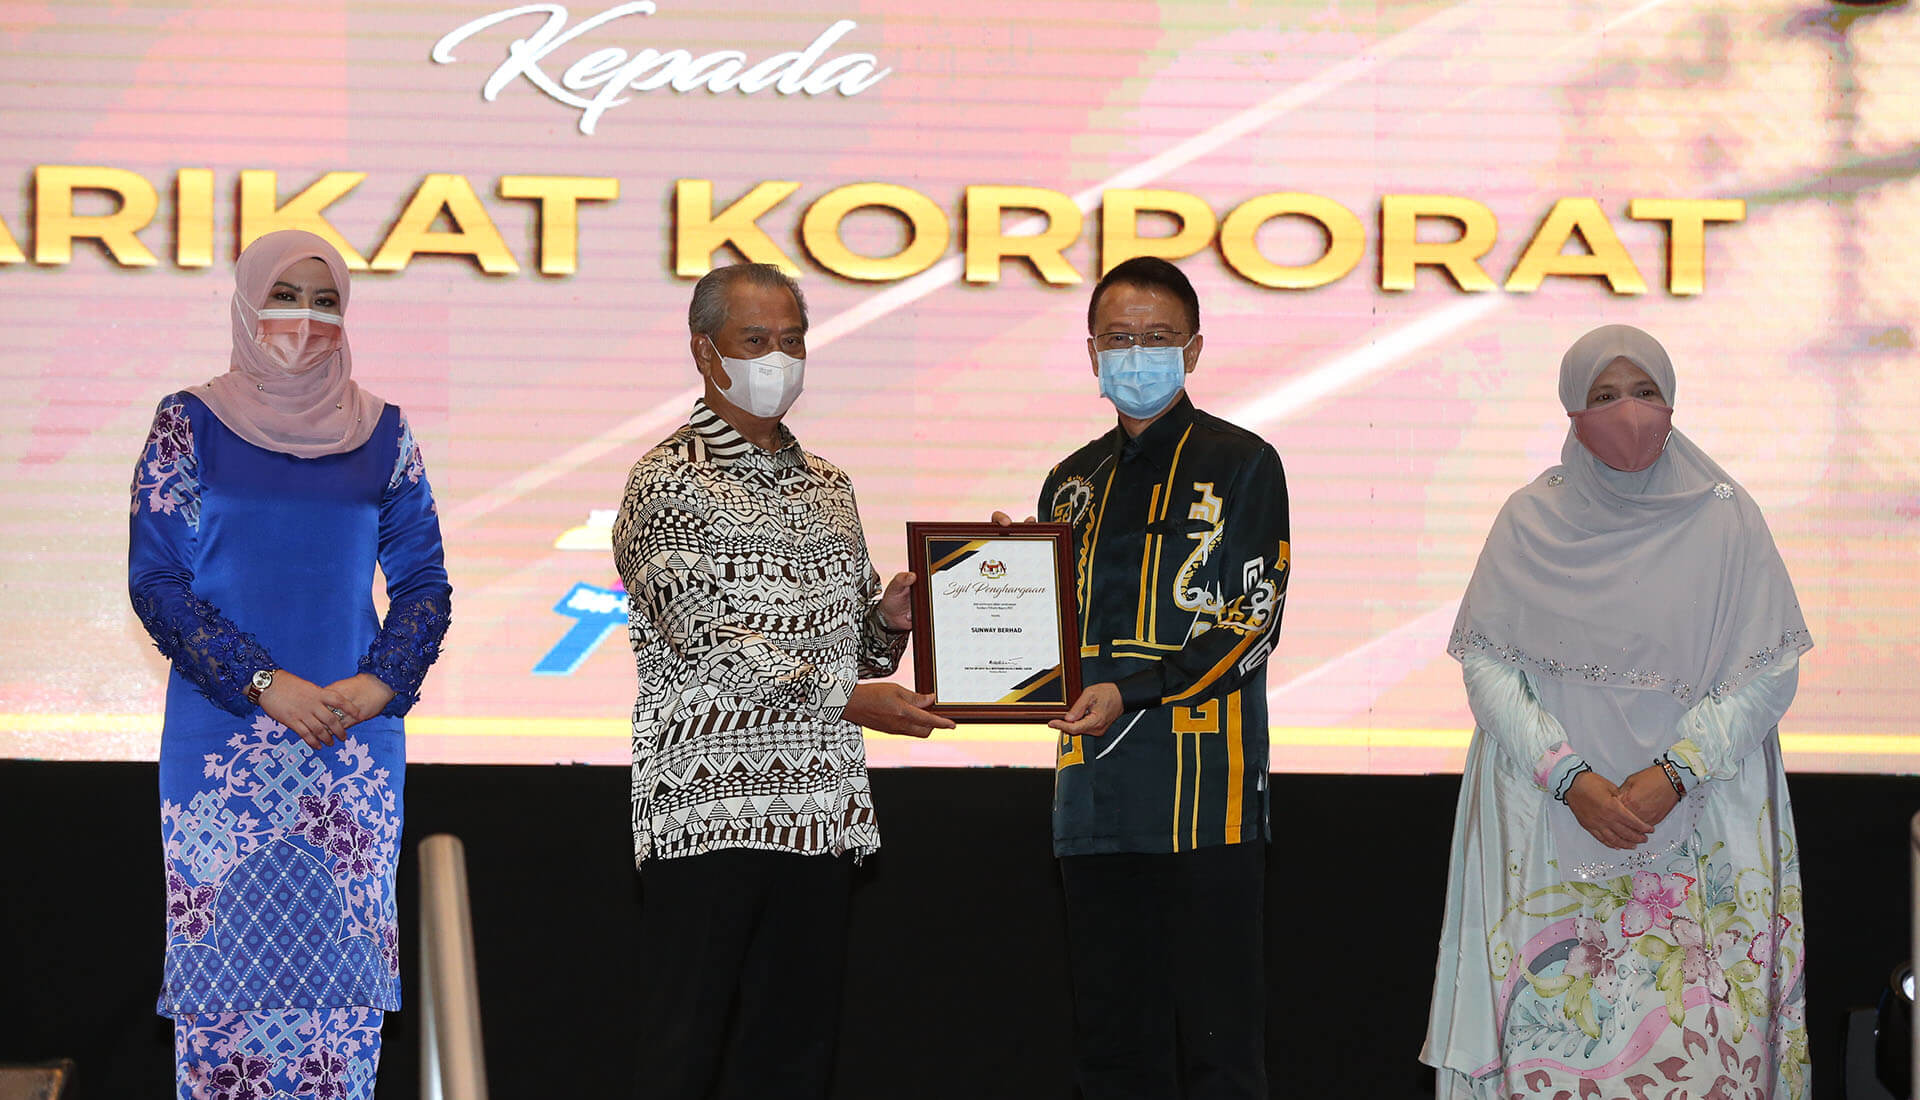 Sunway Group Founder and Chairman Tan Sri Dr Jeffrey Cheah (2nd from right) receiving the plaque from YAB Prime Minister Tan Sri Muhyiddin Yassin (3rd from right)